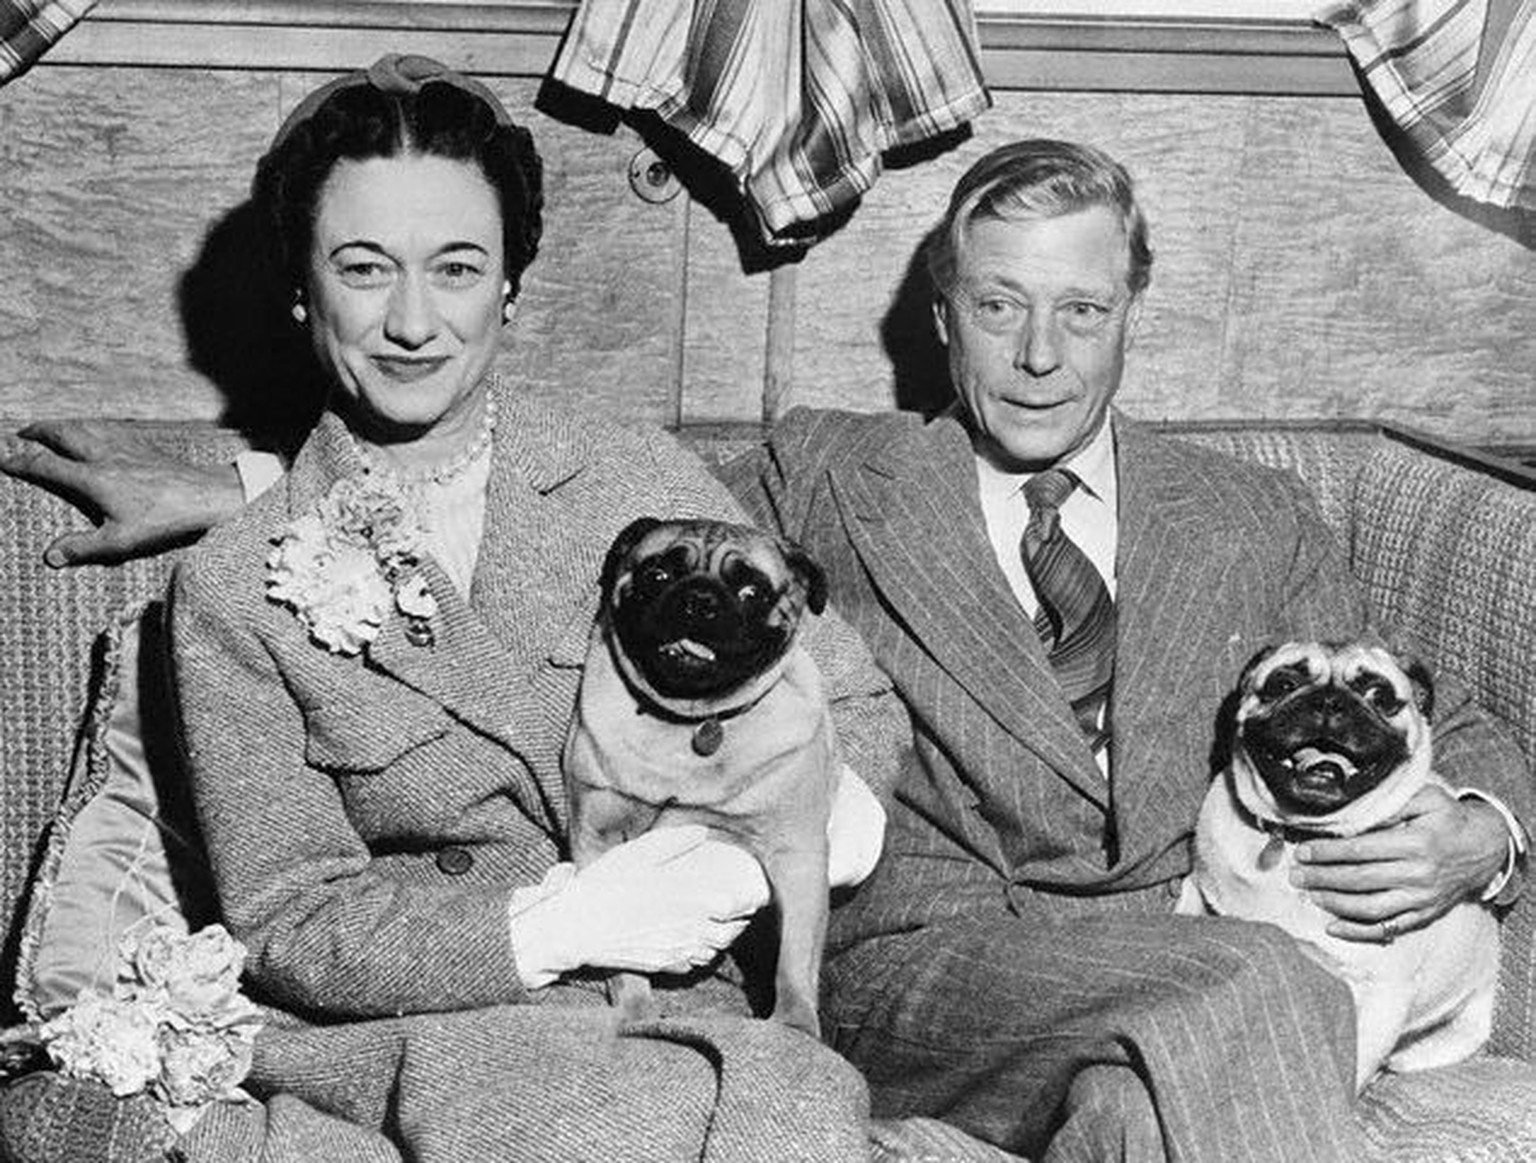 21 Apr 1954 --- Duke and Duchess of Windsor Posing with Their Dogs --- Image by � Bettmann/CORBIS